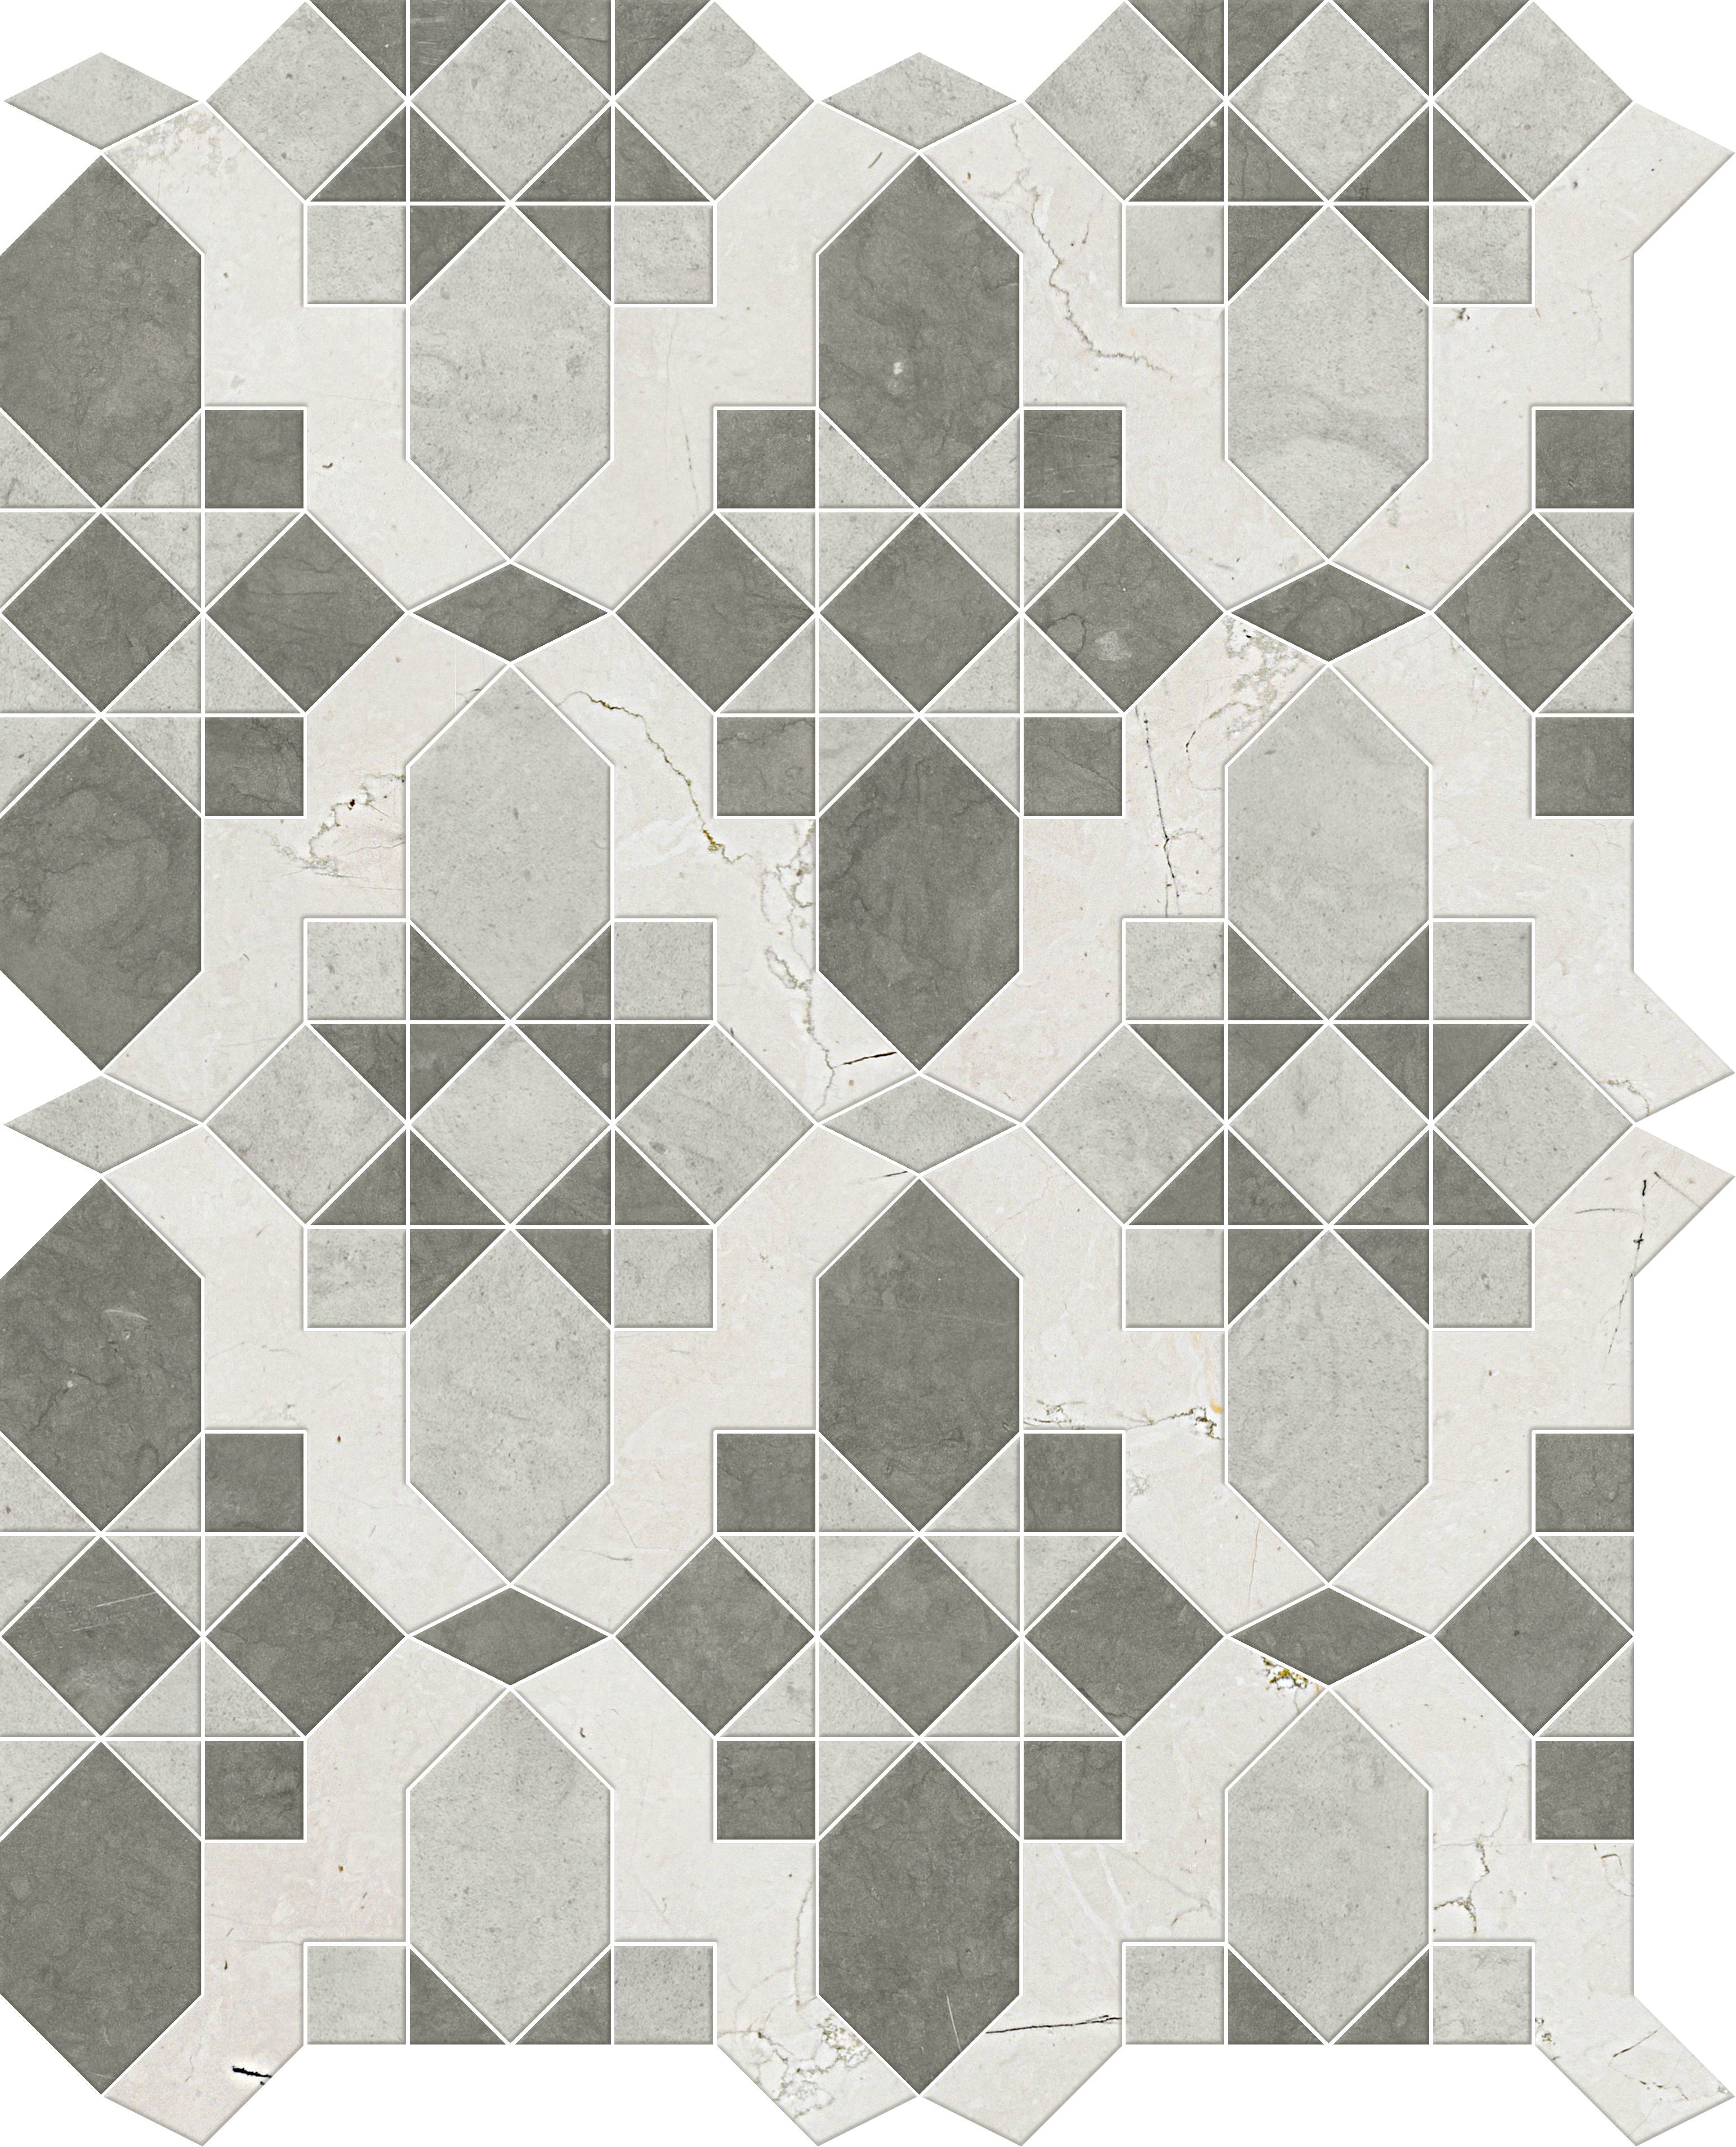 dulcet casablanca warm 1wcsbthg natural stone mosaic product sheet made by dulcet and sold by surface group international